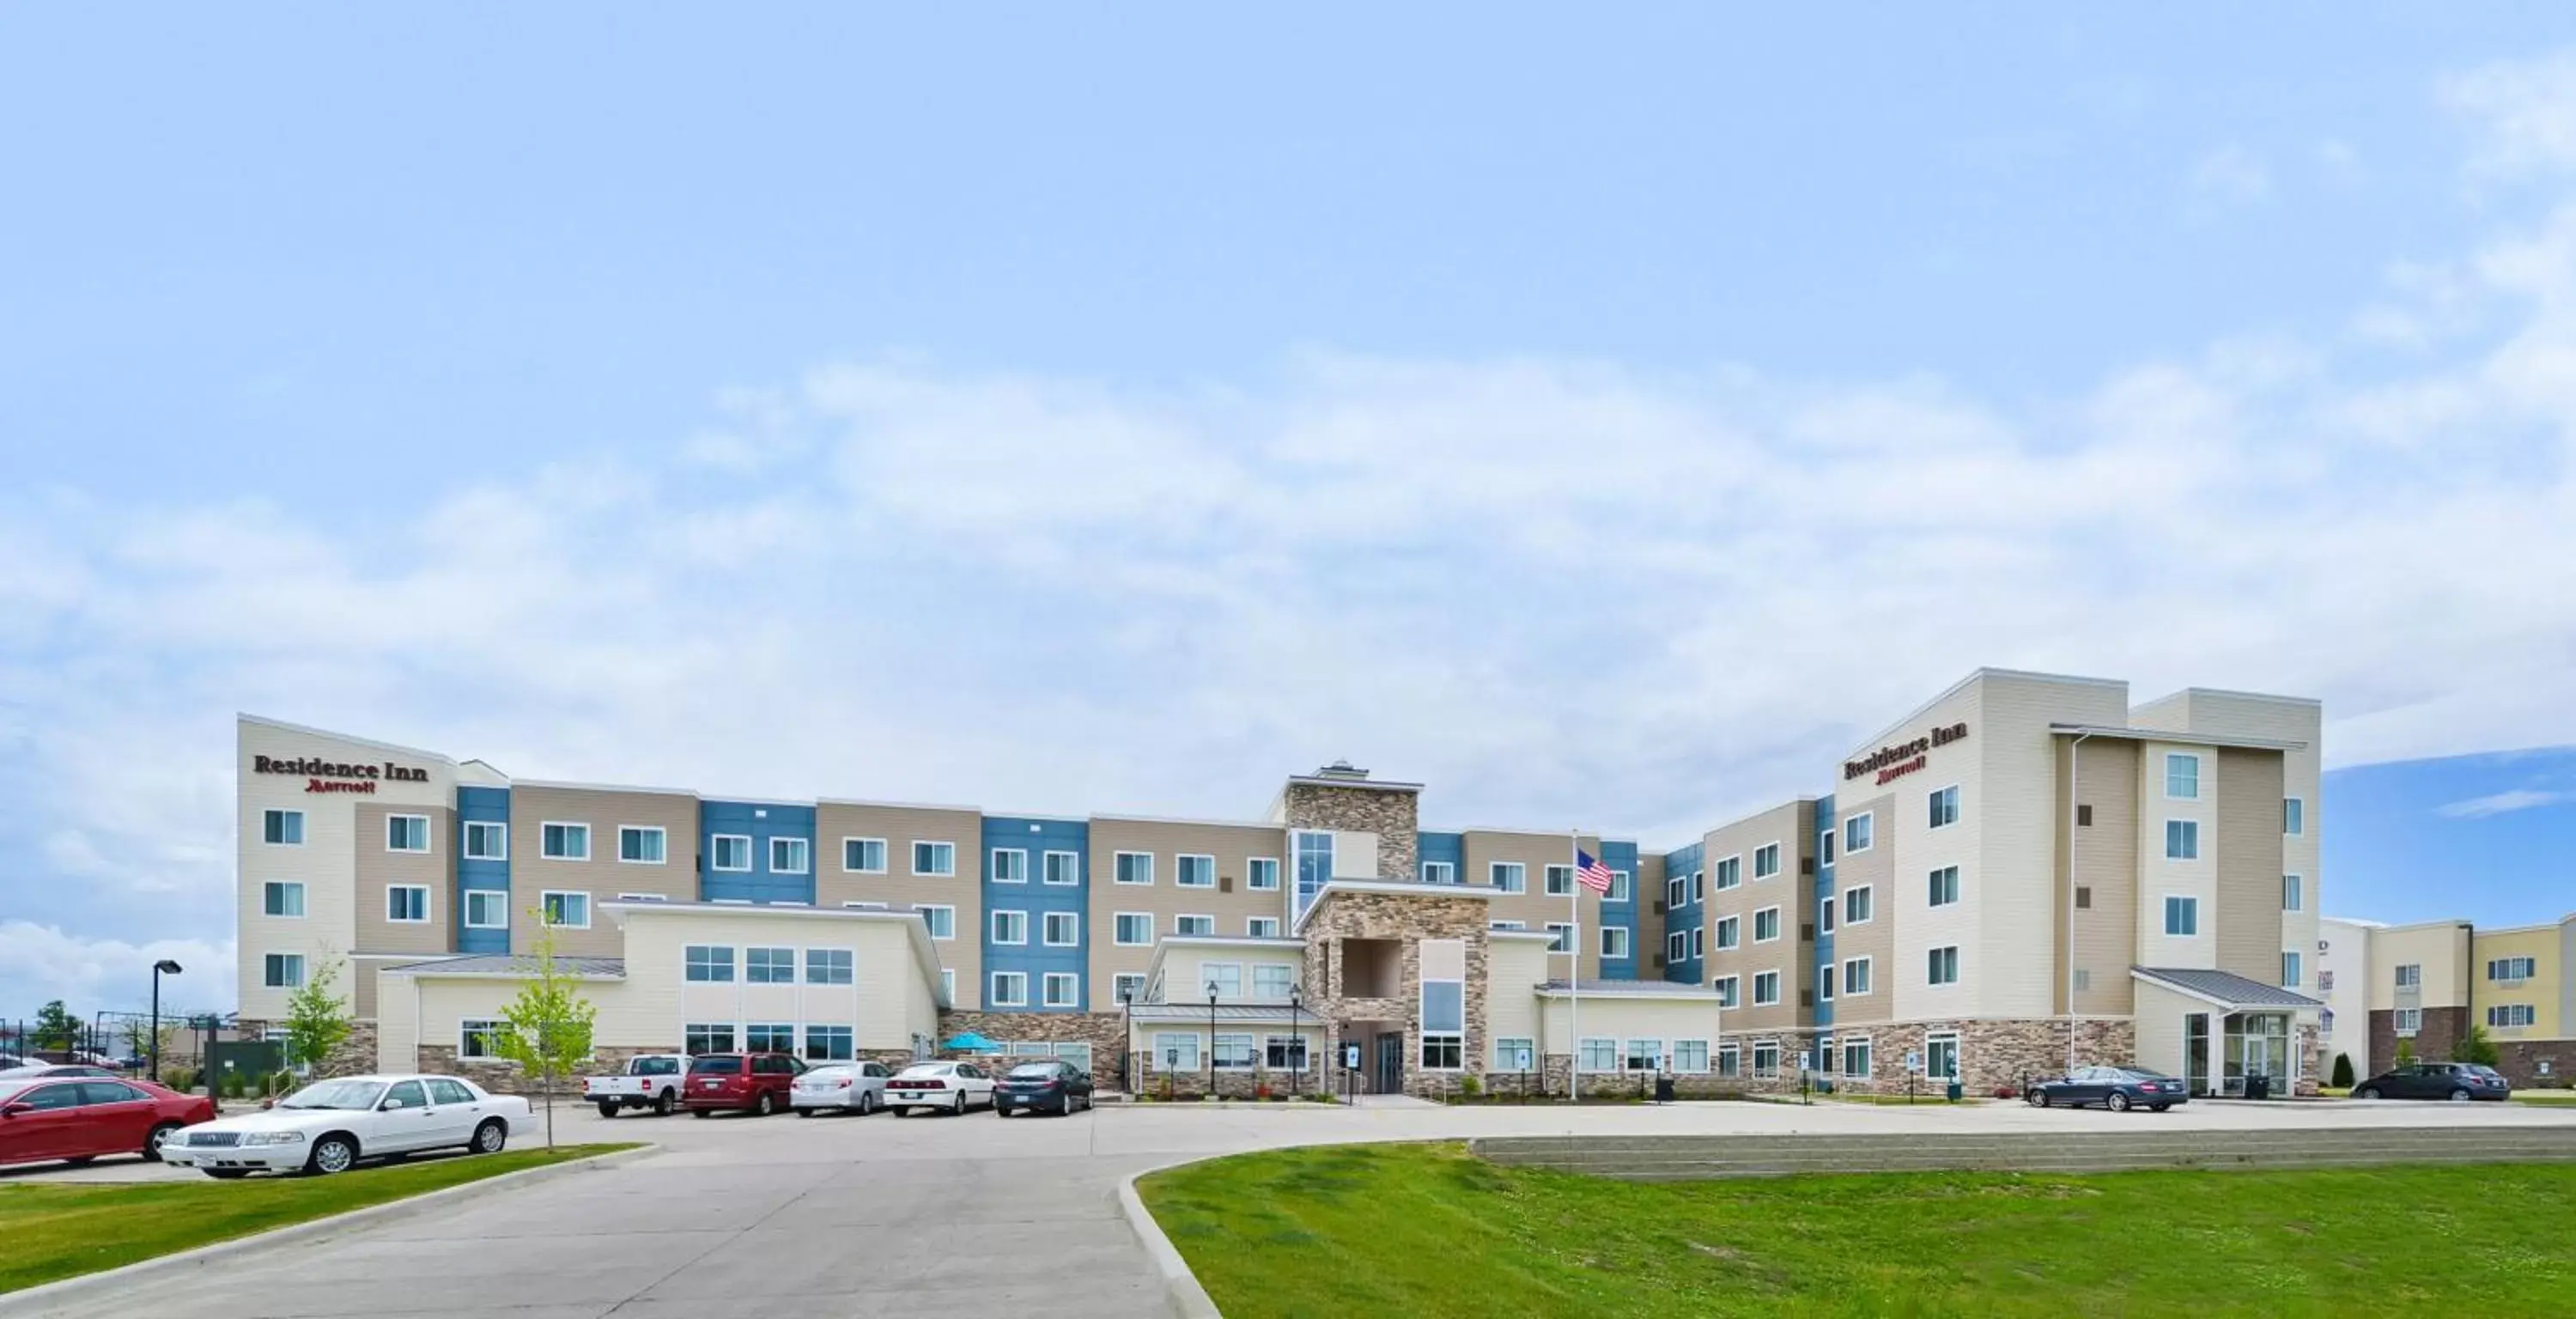 Property Building in Residence Inn by Marriott Champaign